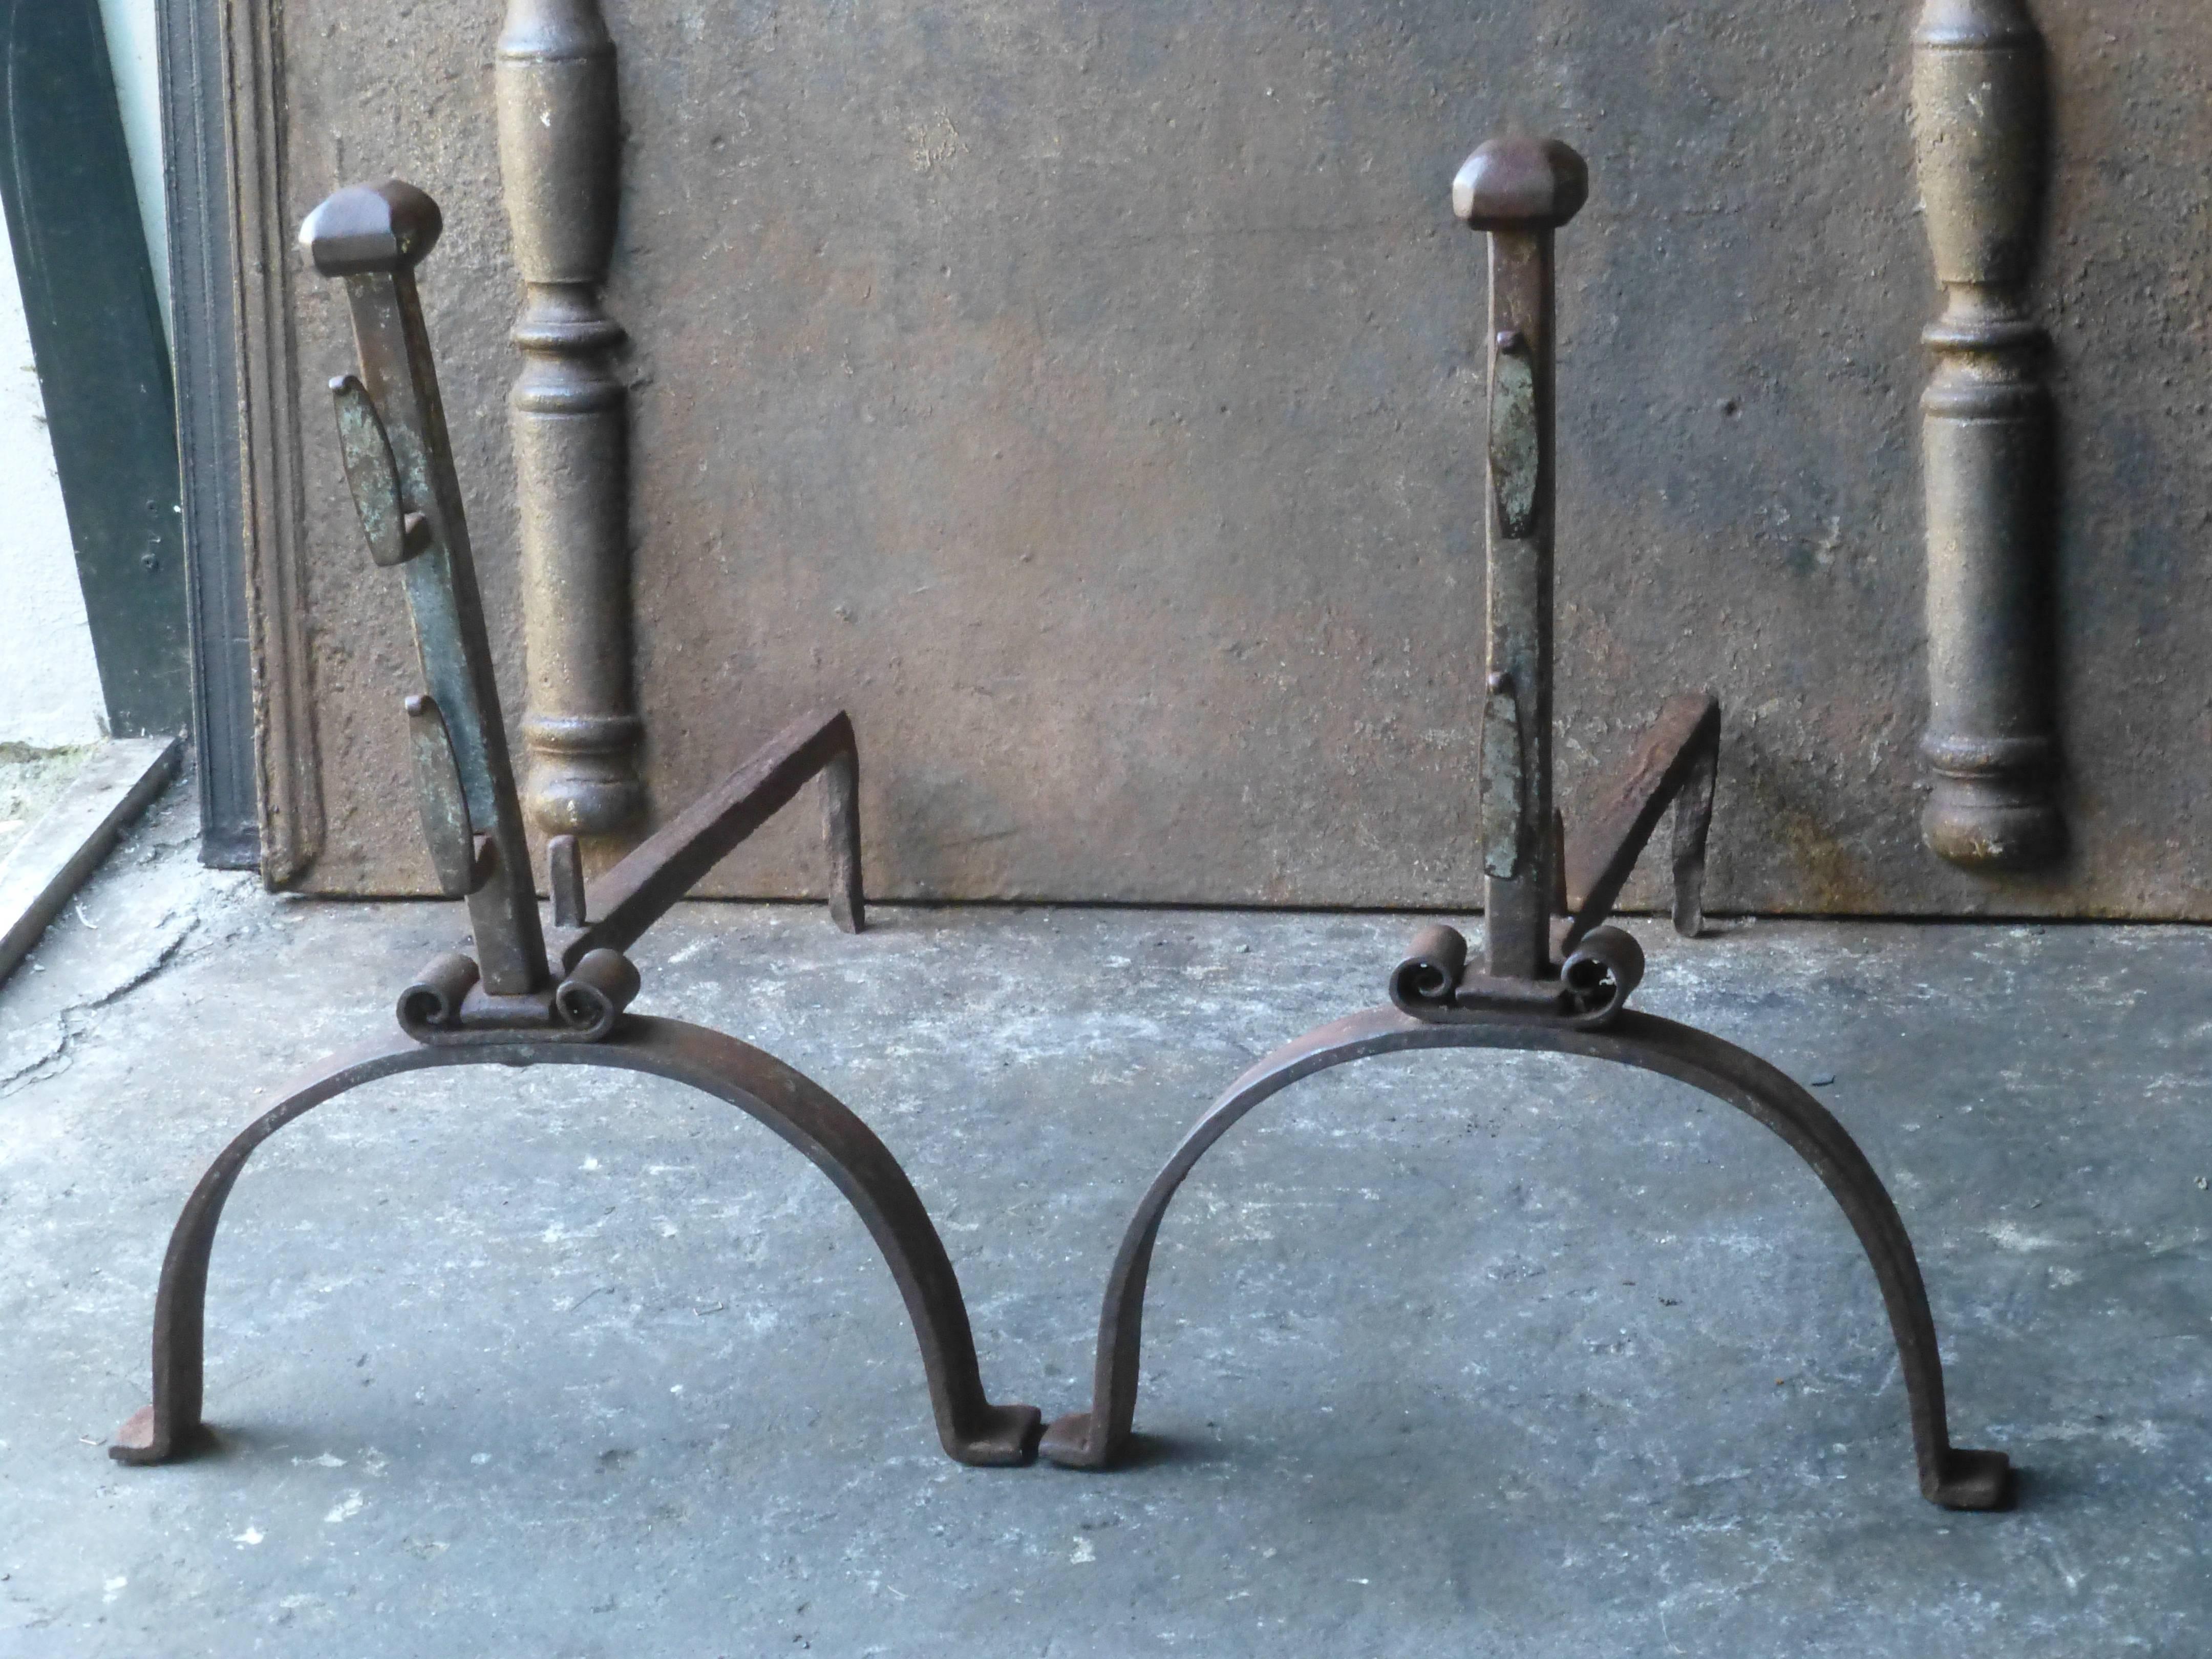 19th century French Napoleon III period andirons, firedogs, made of wrought iron. The condition is good.